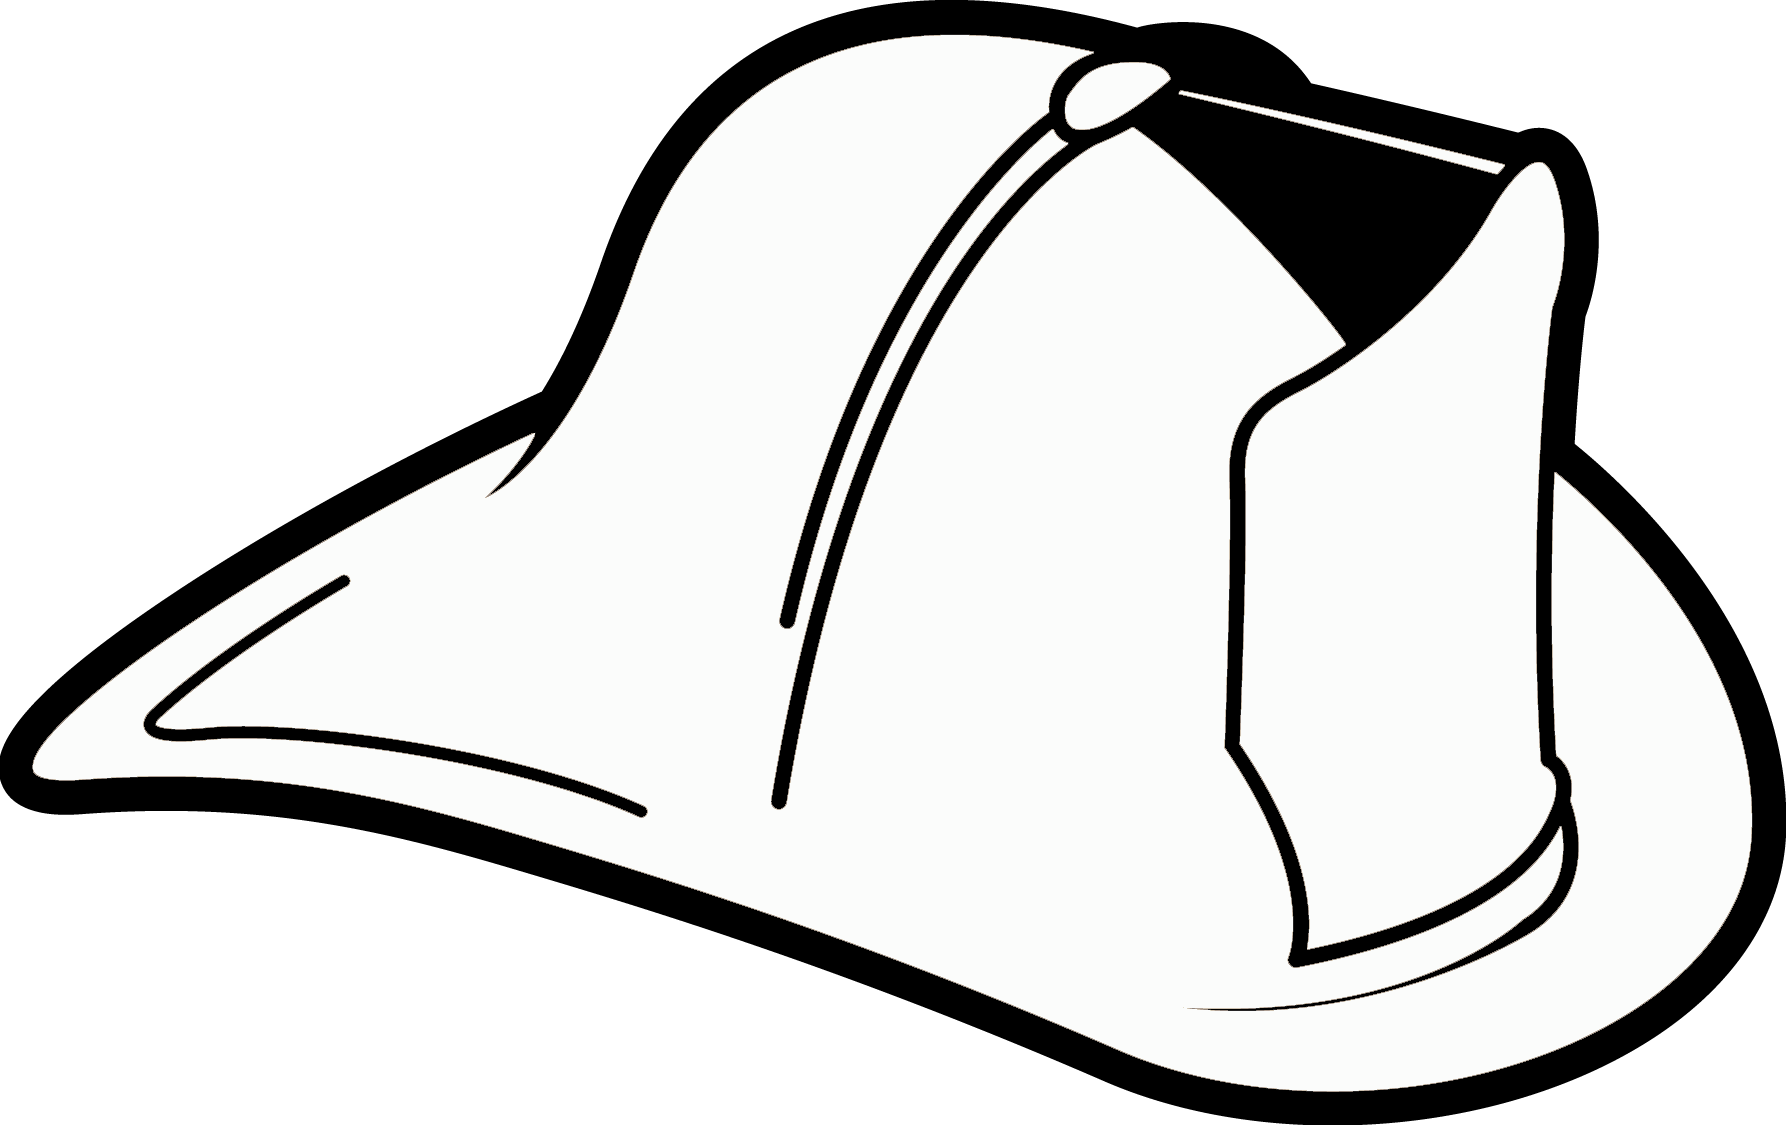 Coat coloring page